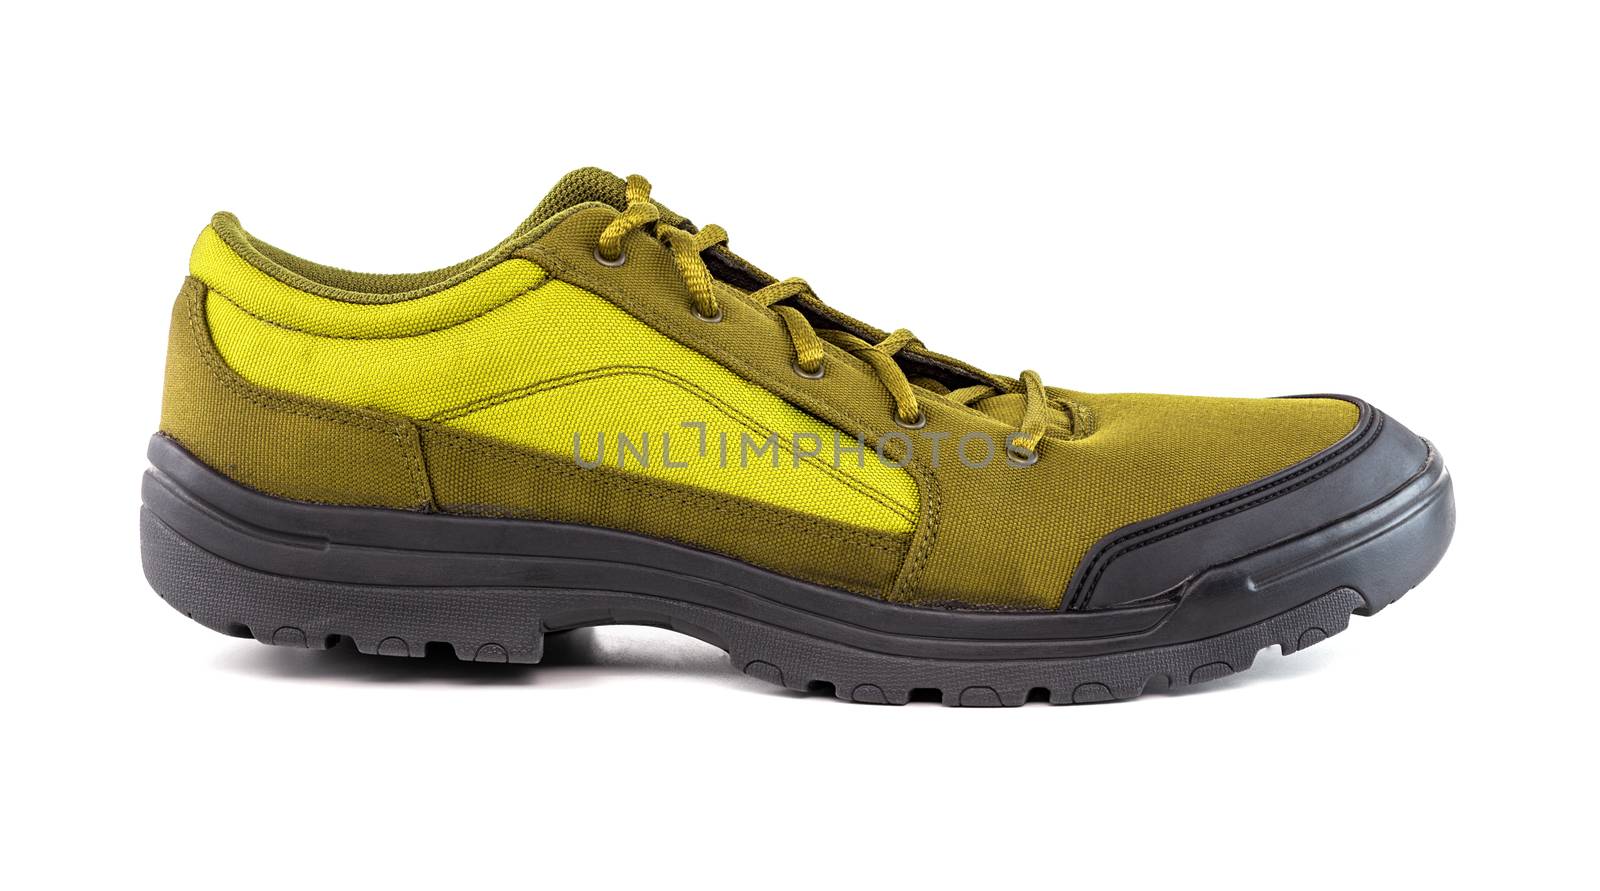 right cheap yellow hiking or hunting shoe isolated on white background.